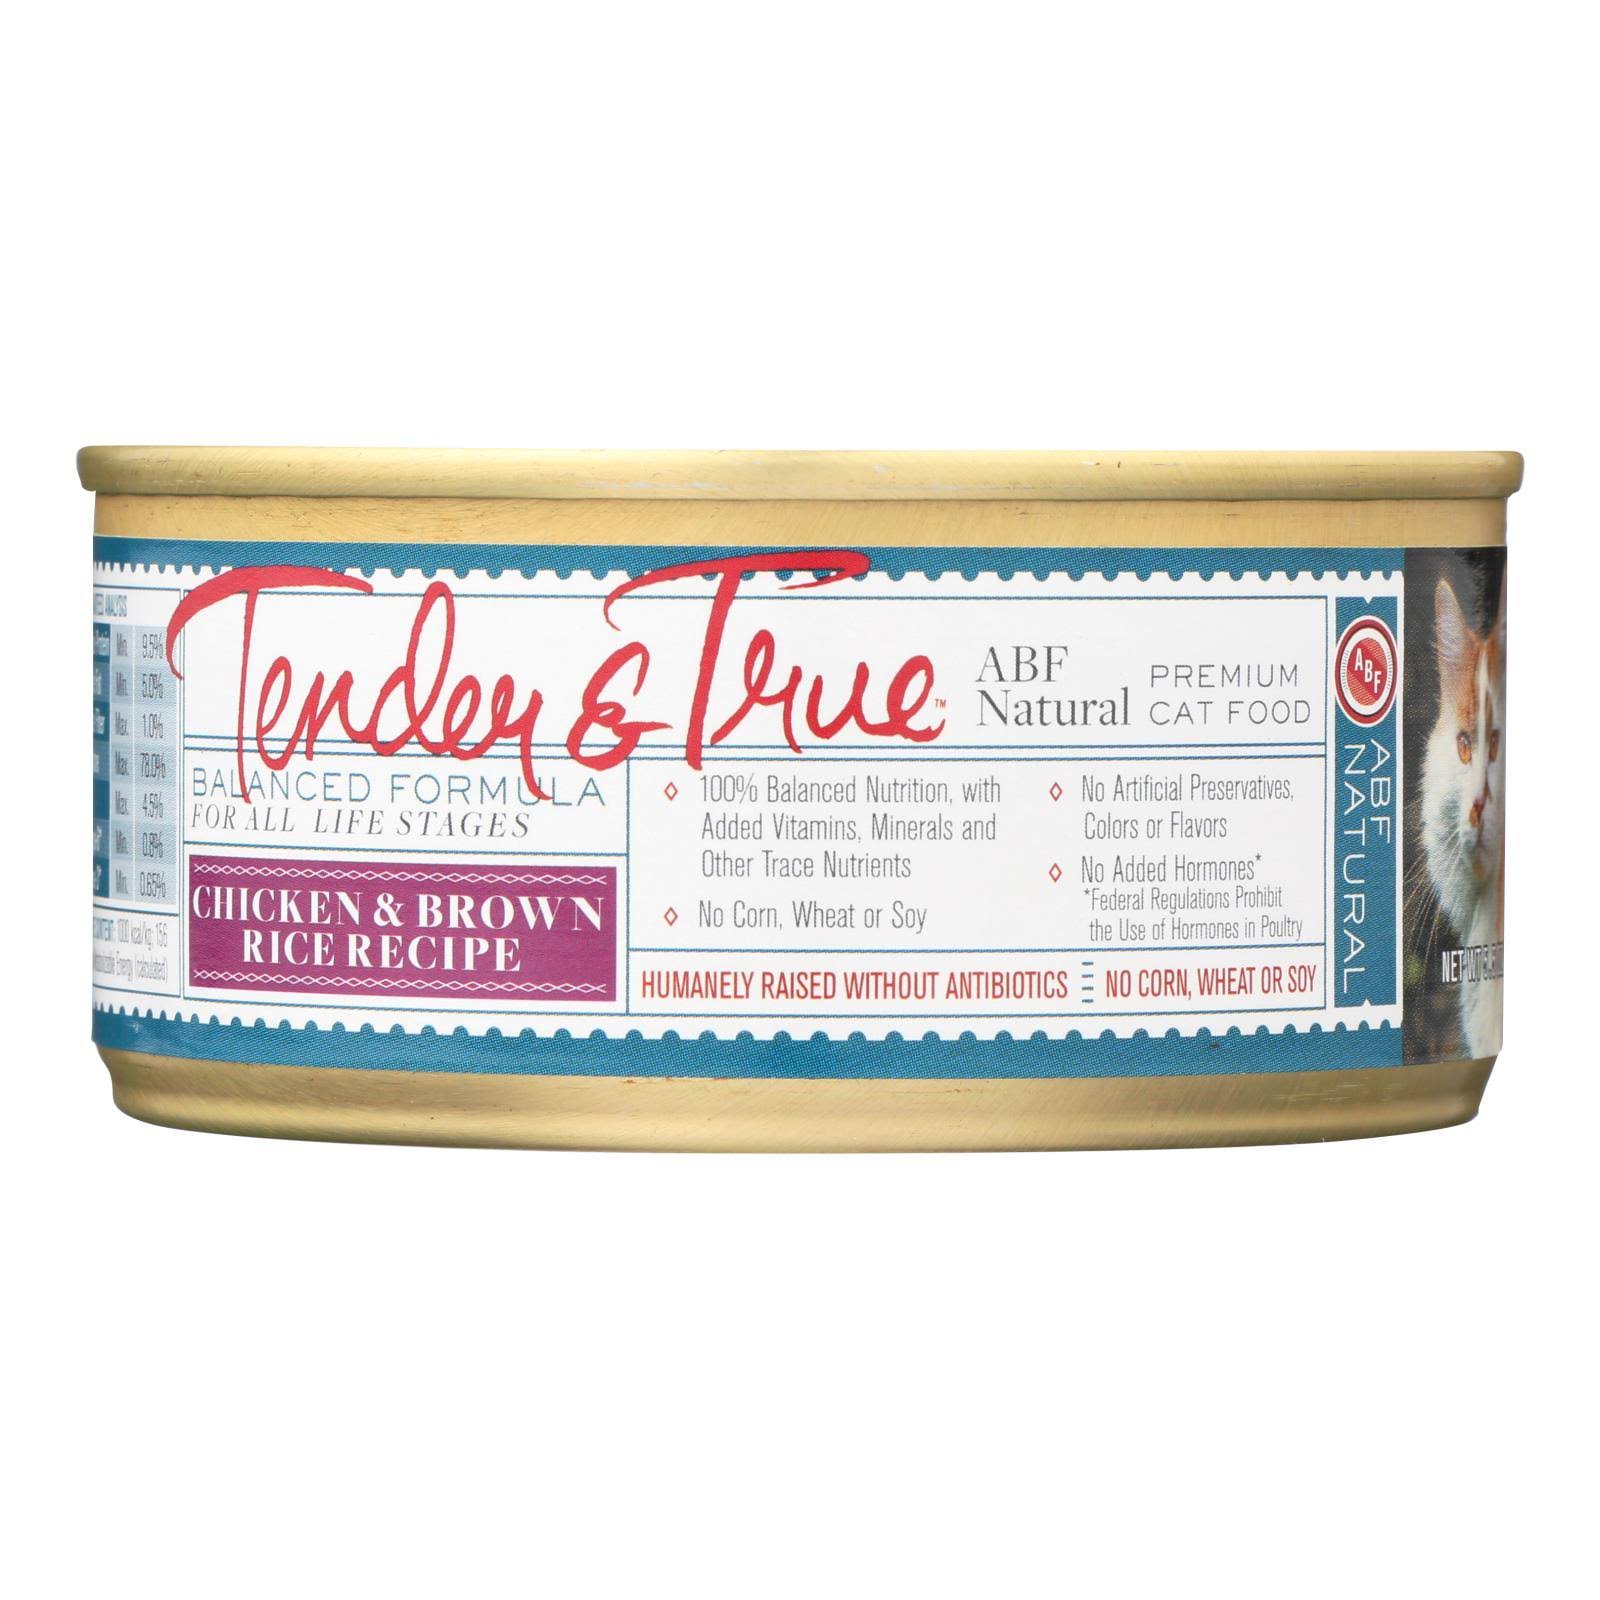 Tender & True Cat Food Chicken and Brown Rice - Case of 24 - 5.5 oz